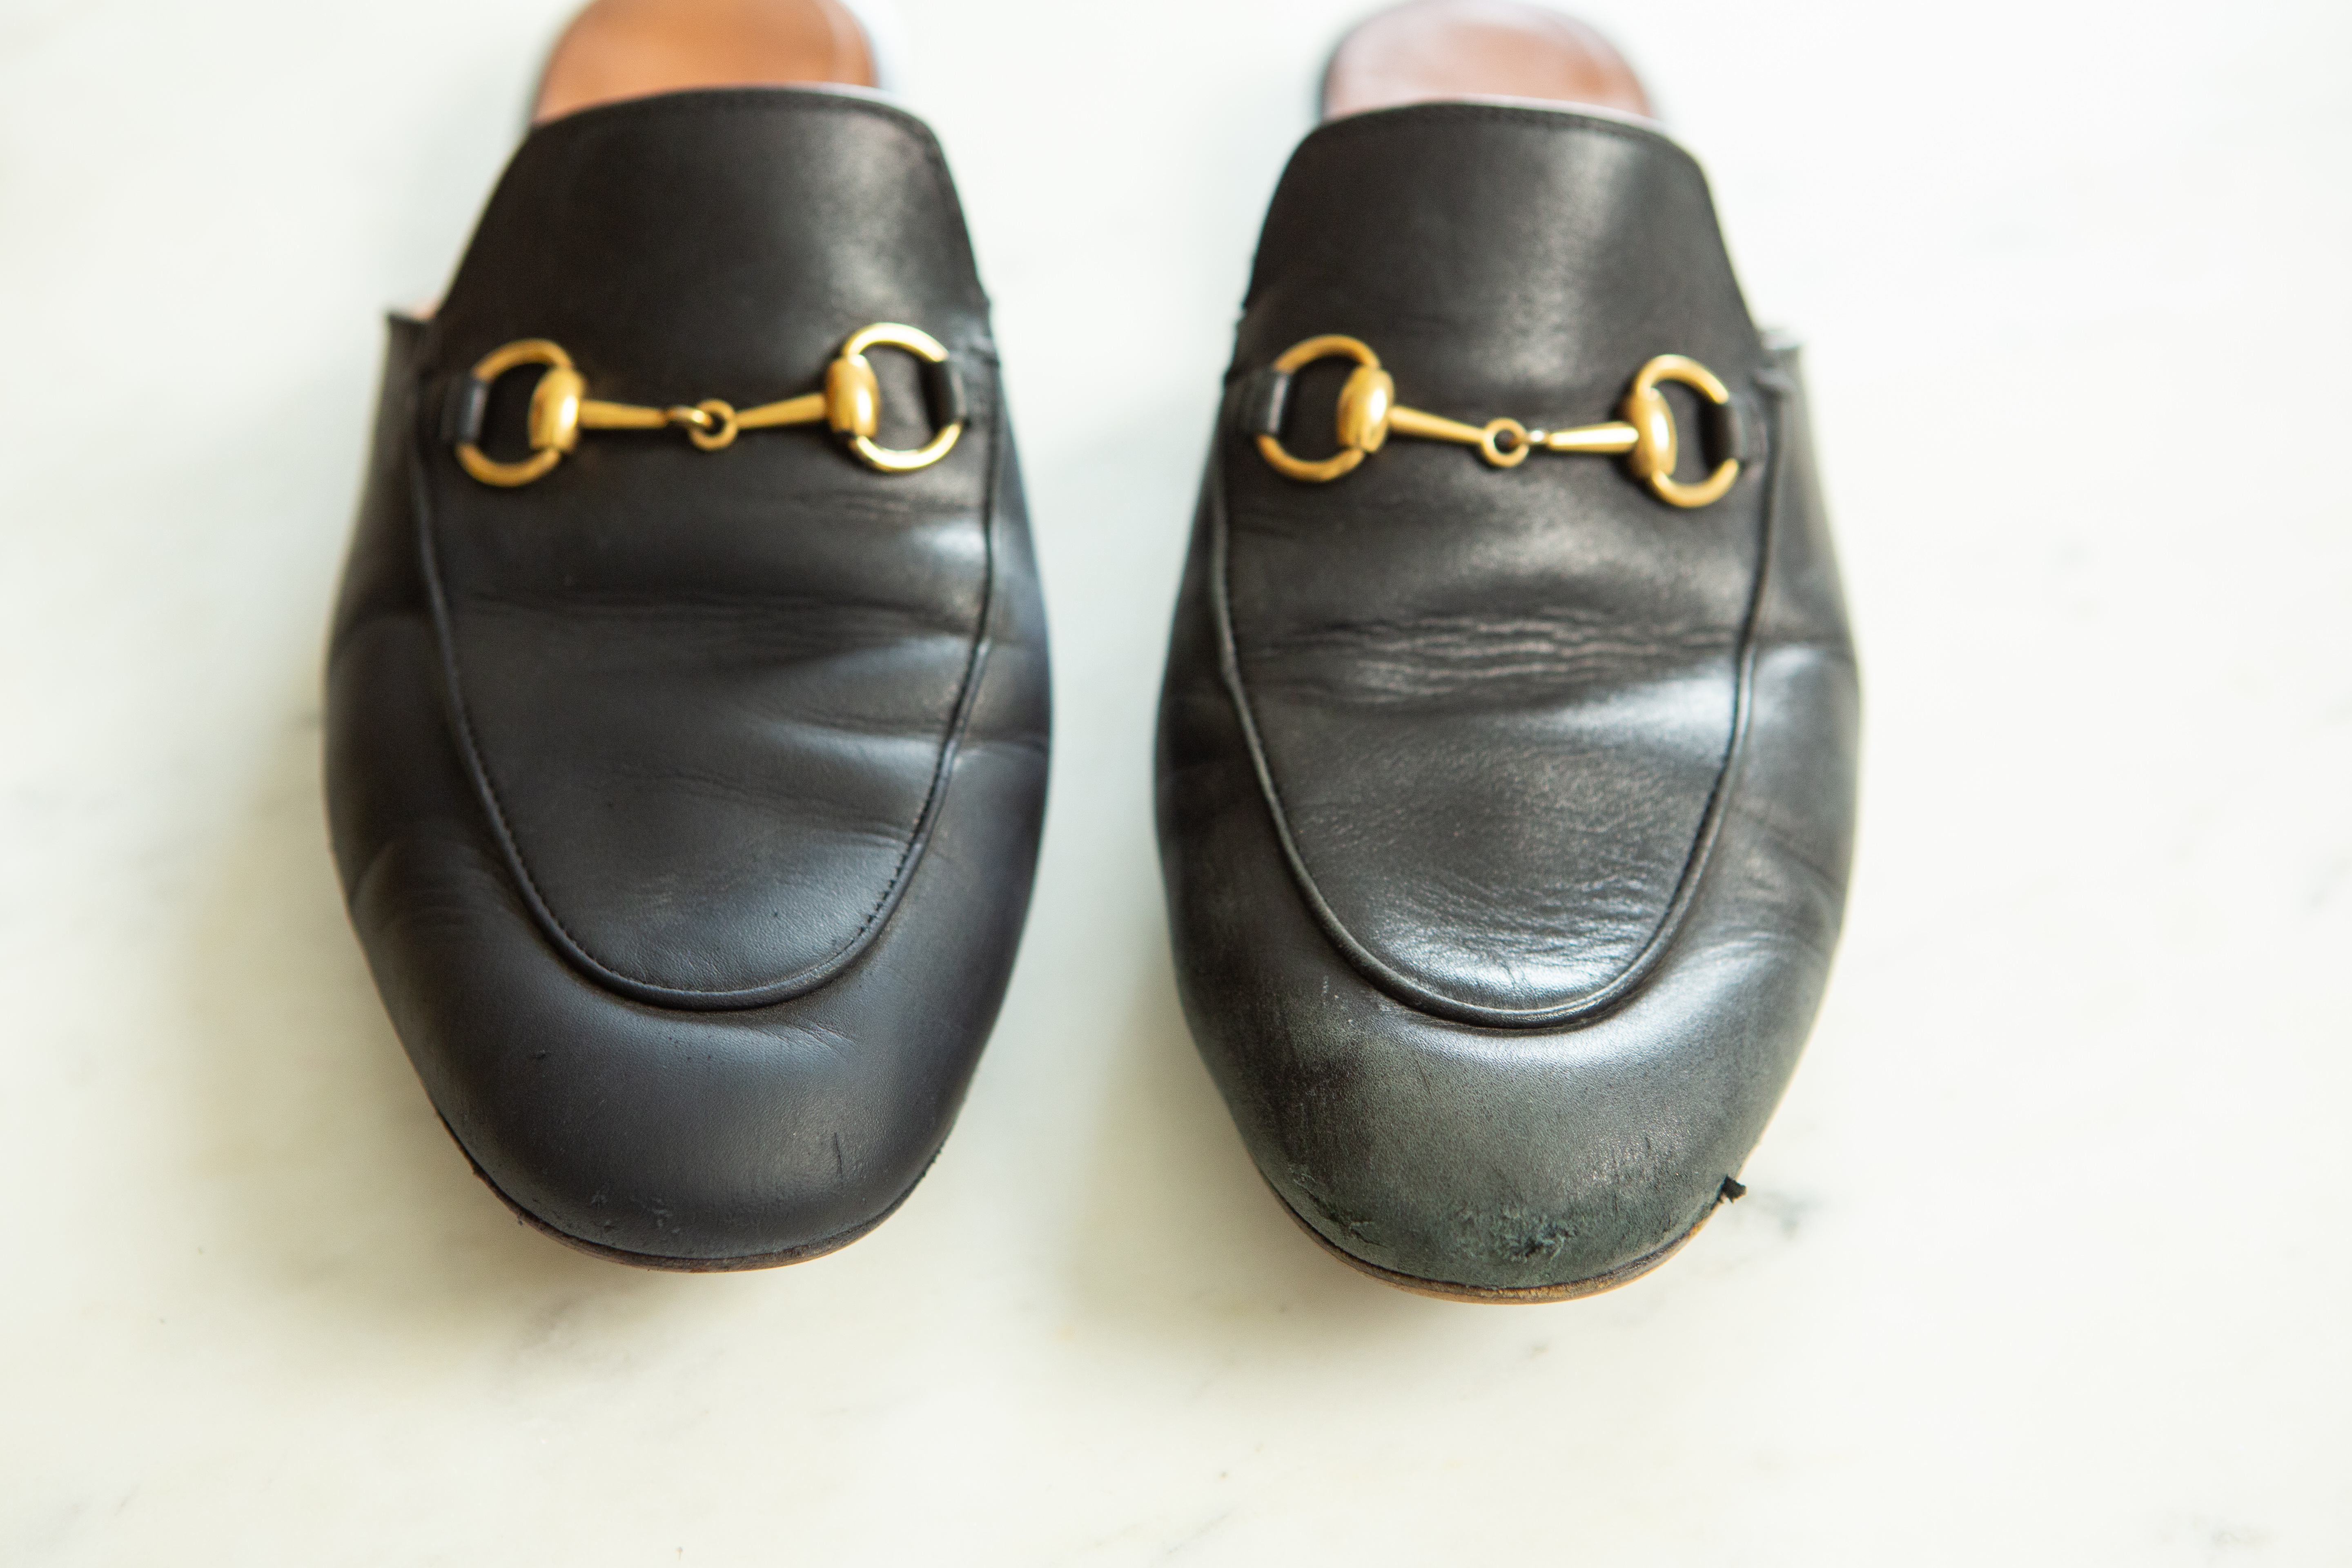 How To Shine Gucci Princetown Loafers At Home | Lauren Messiah